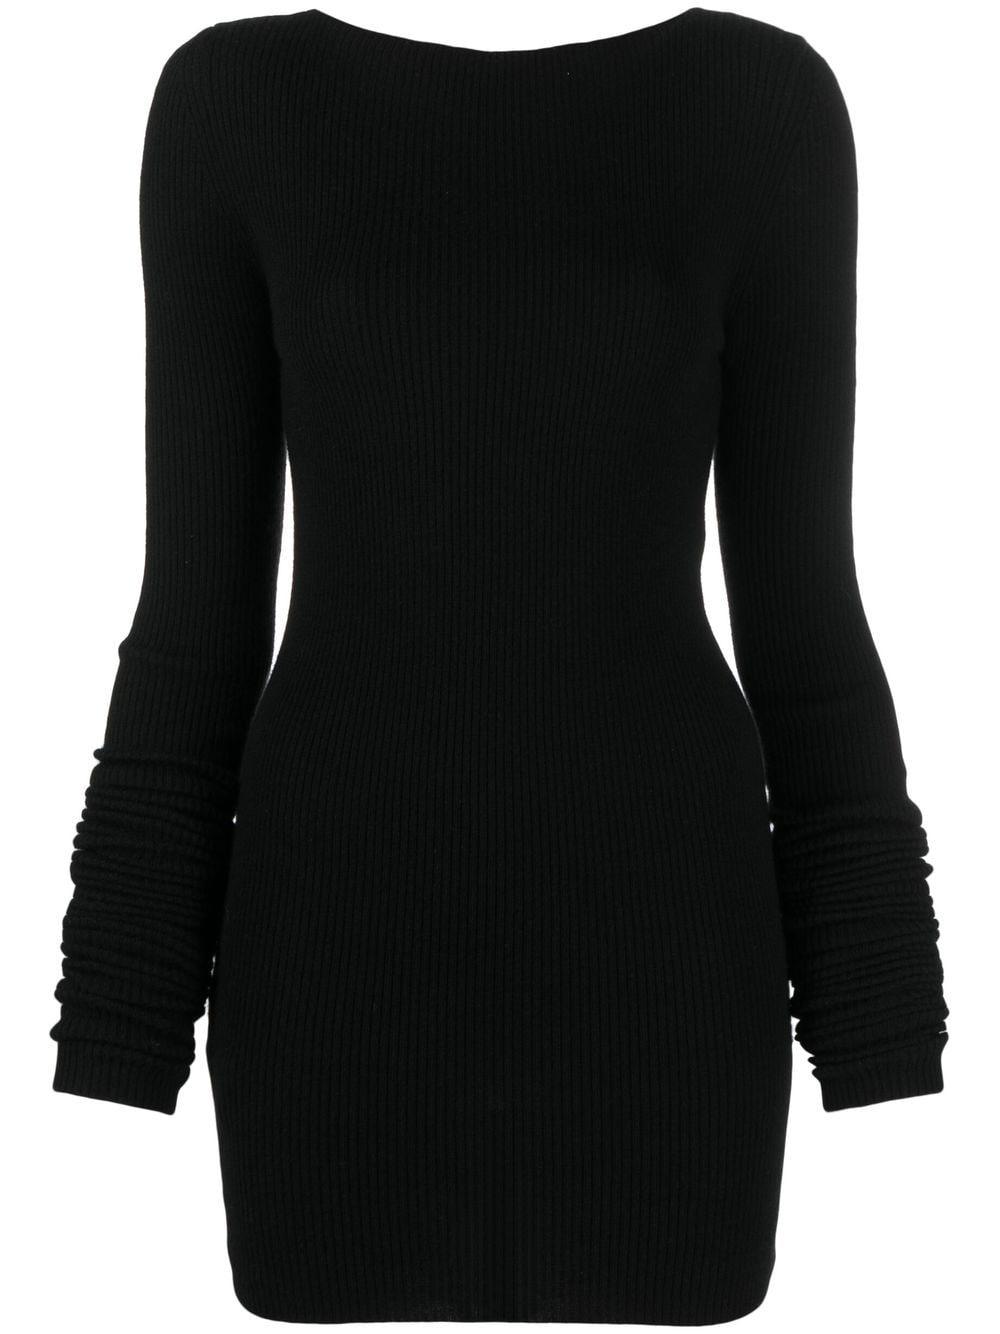 Rick Owens Cut-out Detail Knitted Top in Black | Lyst